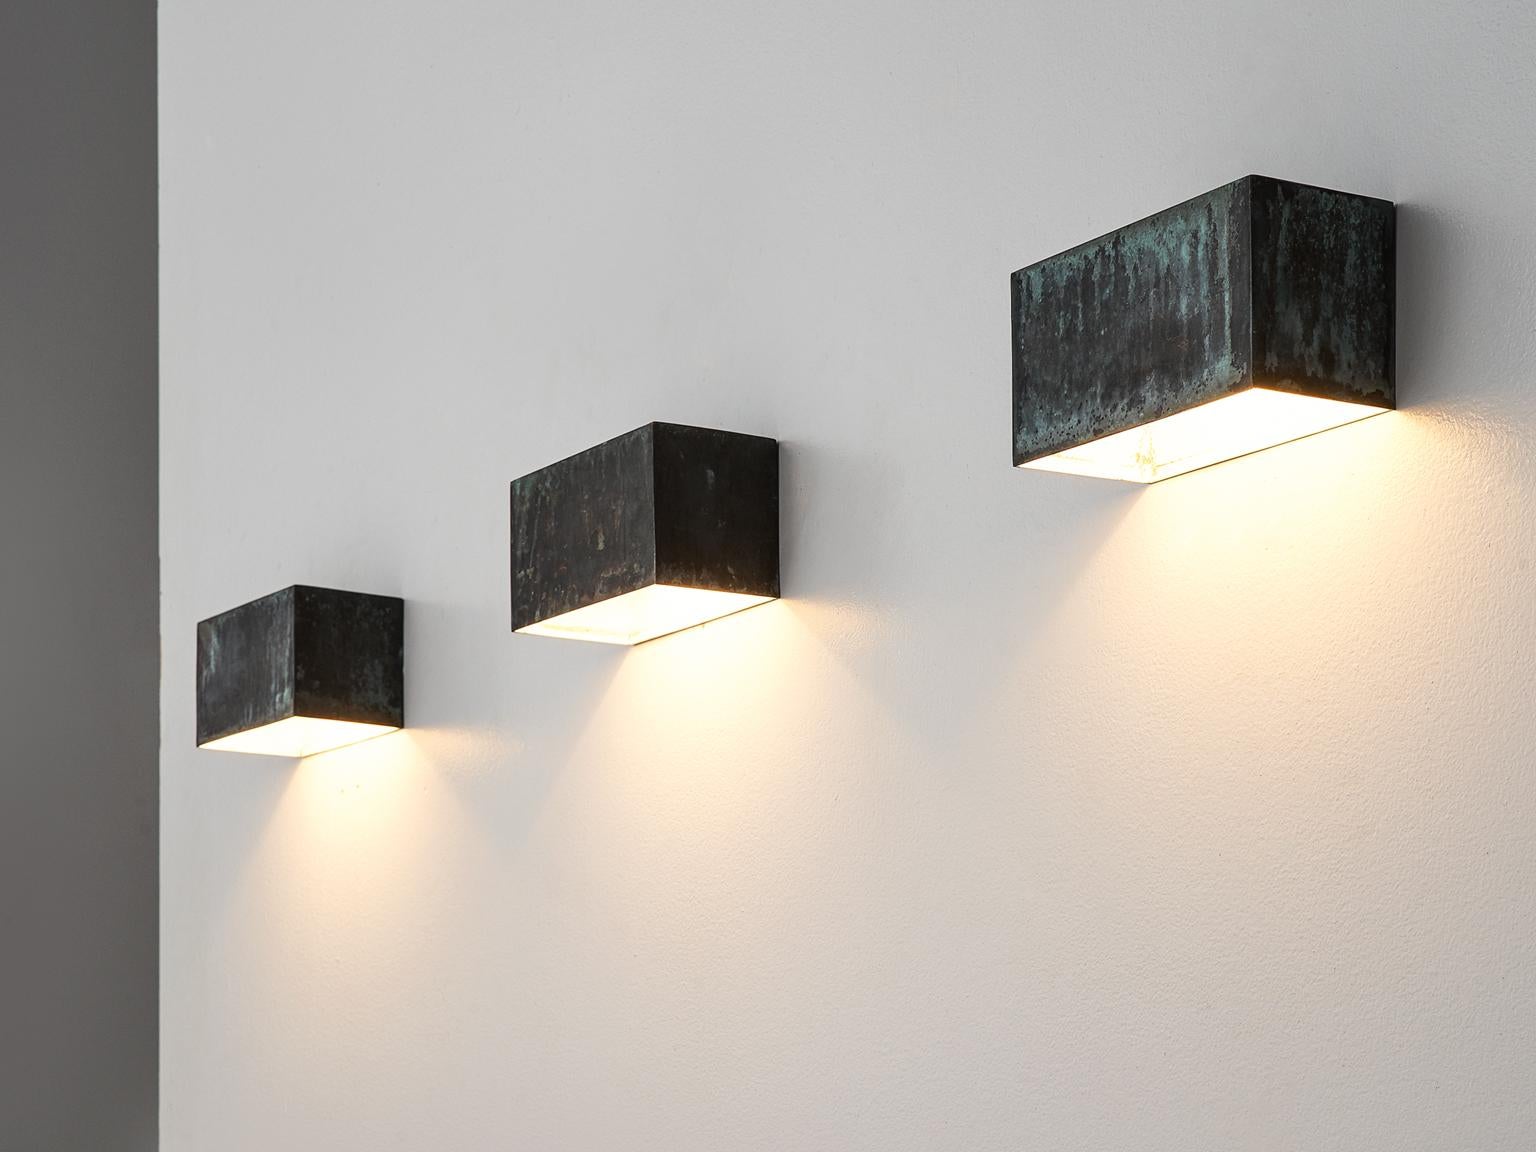 Hansson & Co., wall lights, copper, Sweden, 1960s. 

This large set of wall lights is designed by AB E. Hansson & Co. These geometric patinated lights feature traits of the style of Hans-Agne Jakobsen. The set is simplistic and qualitative and